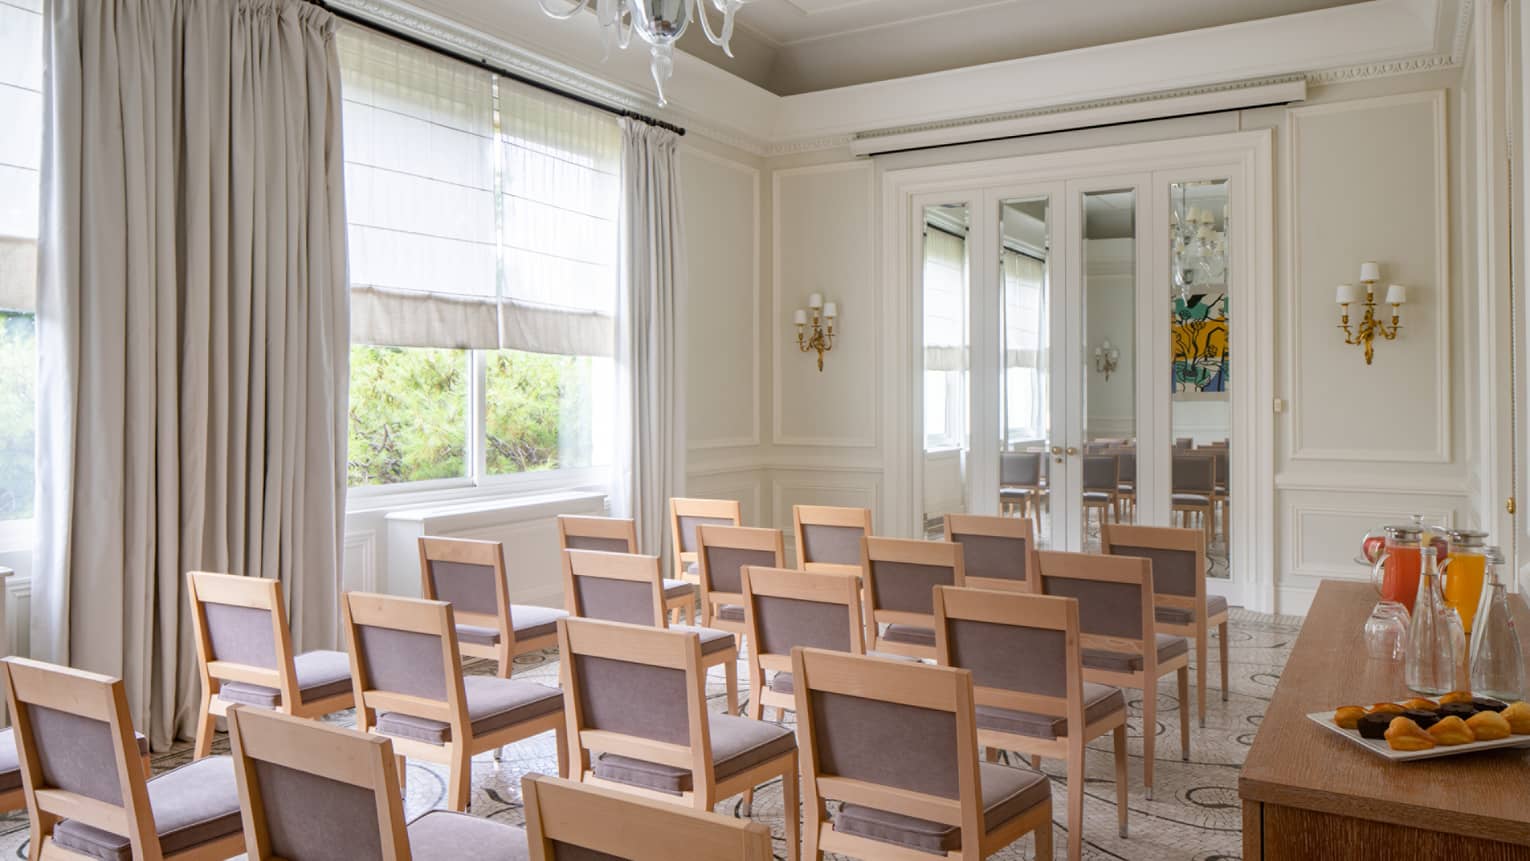 Salon Les Pins with classroom seating, curtained window, chandelier, French doors